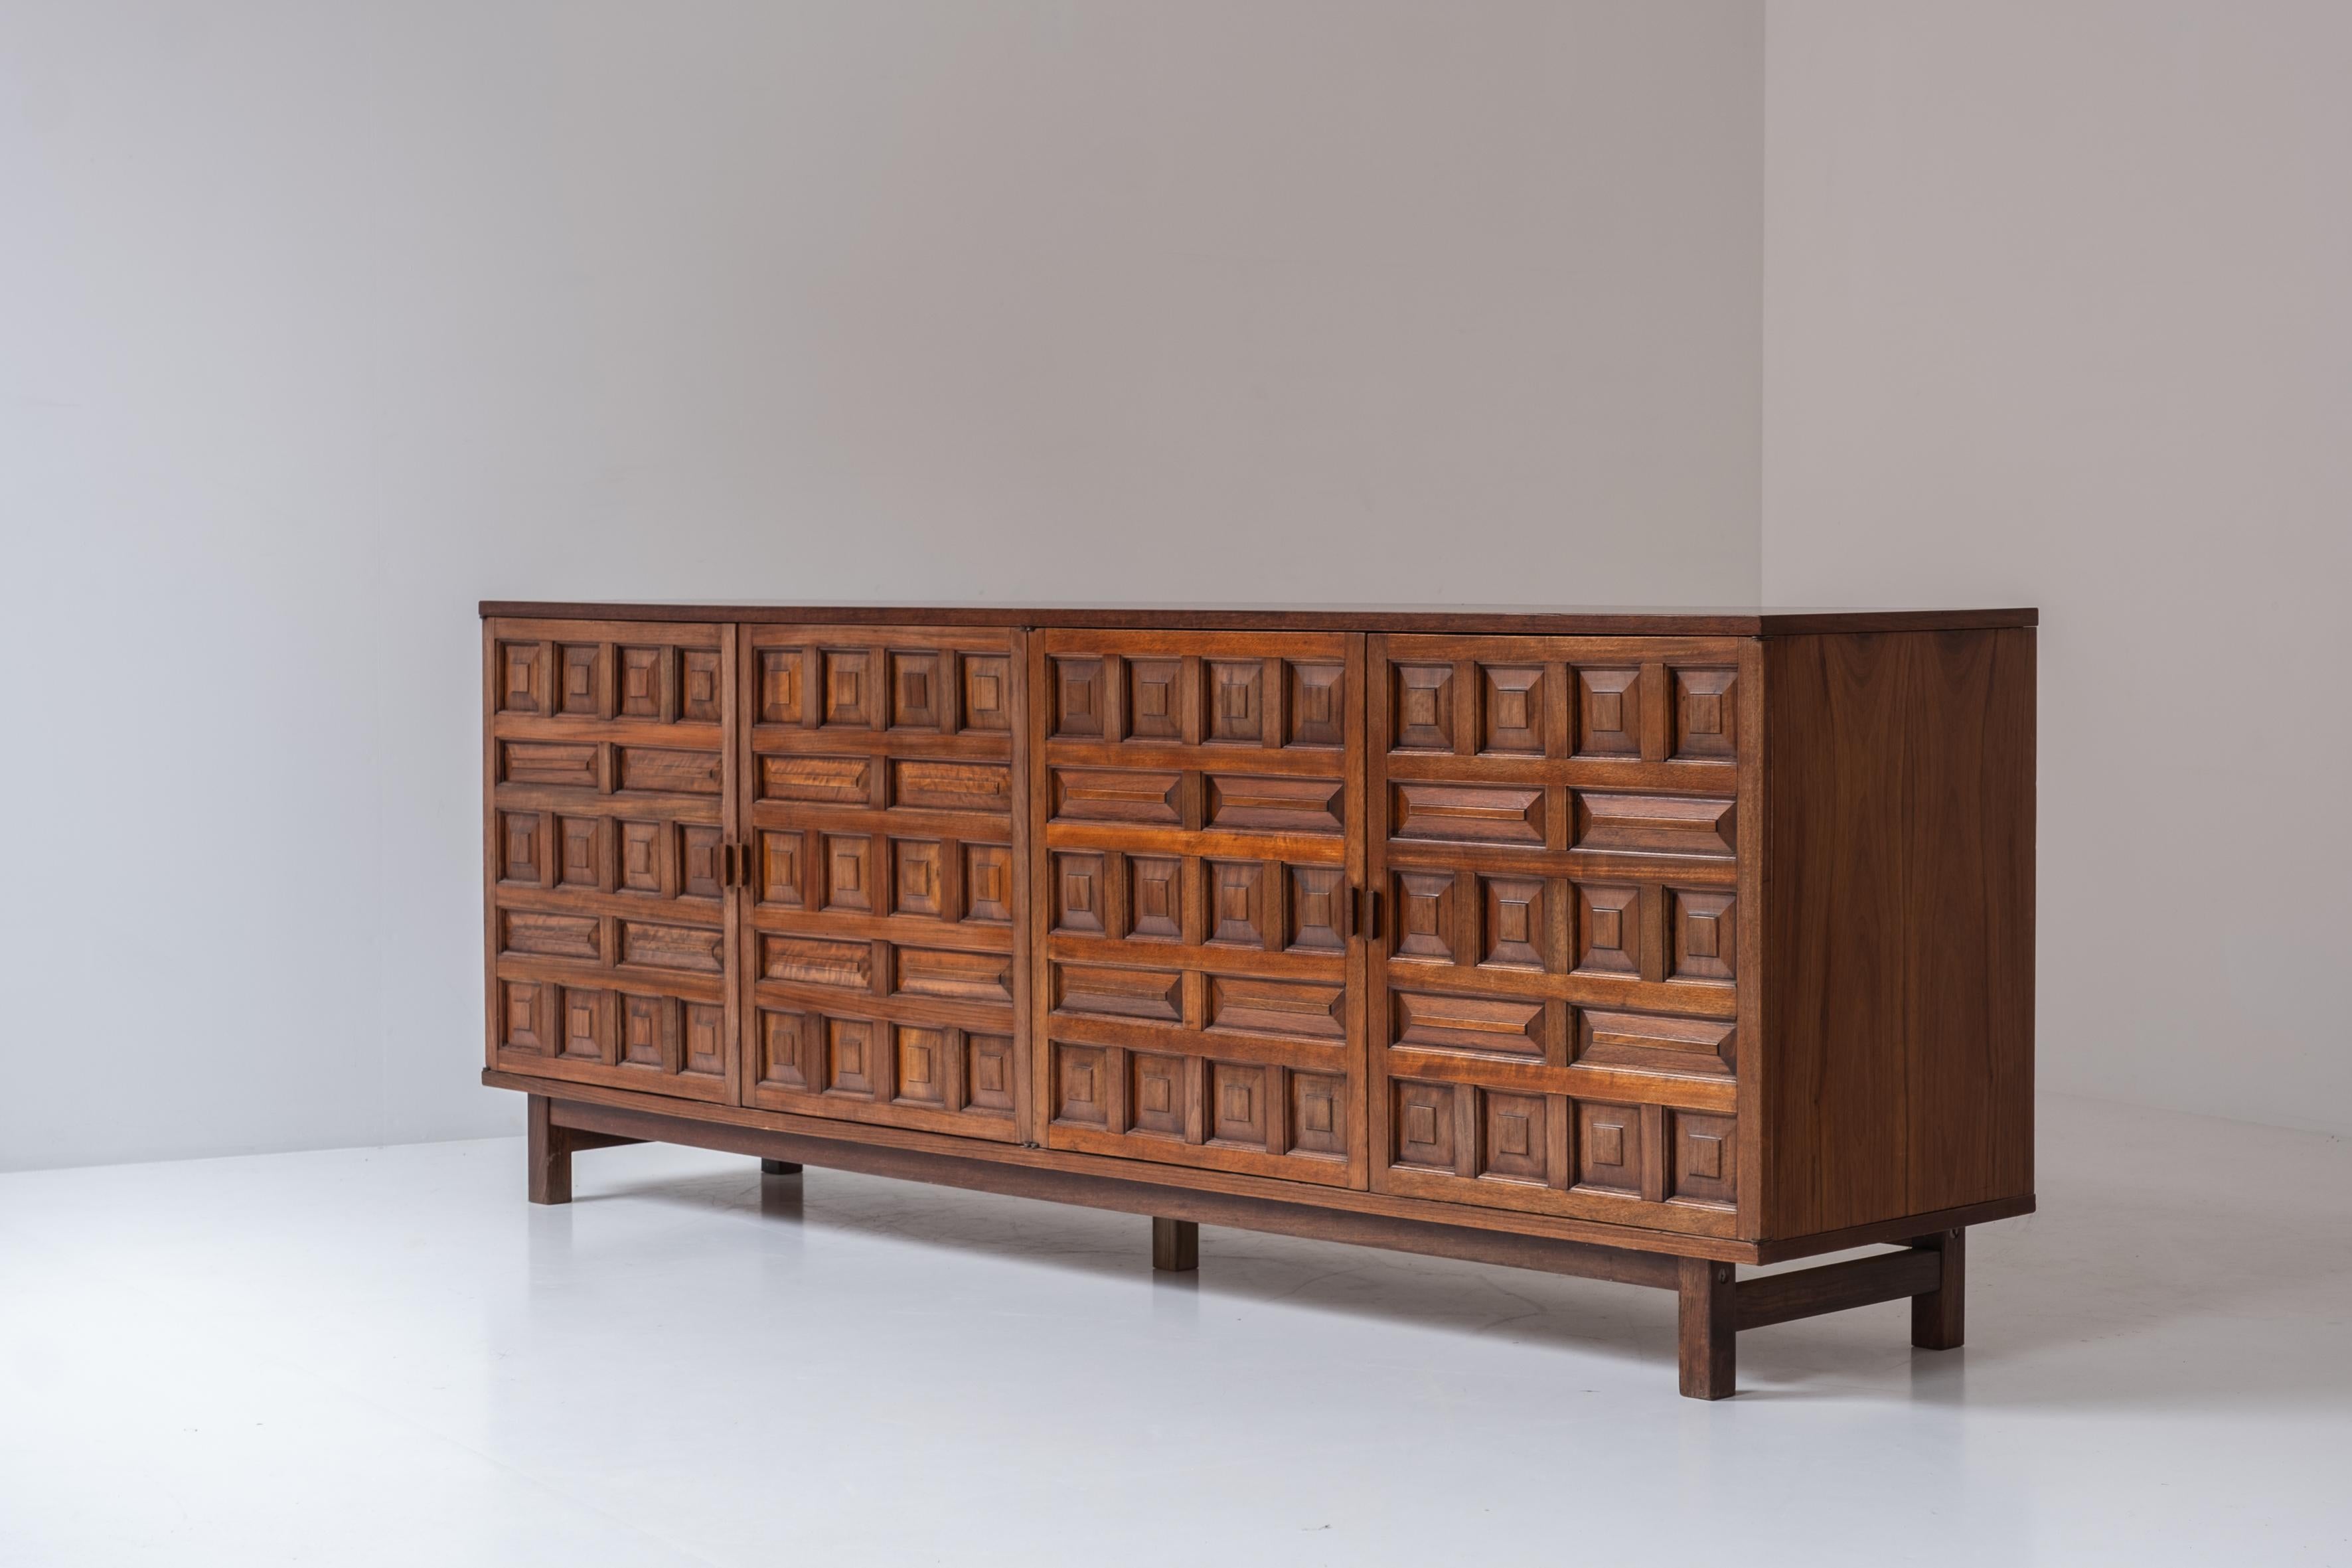 Brutalist sideboard from Spain, designed and manufactured in the 1970s. 2